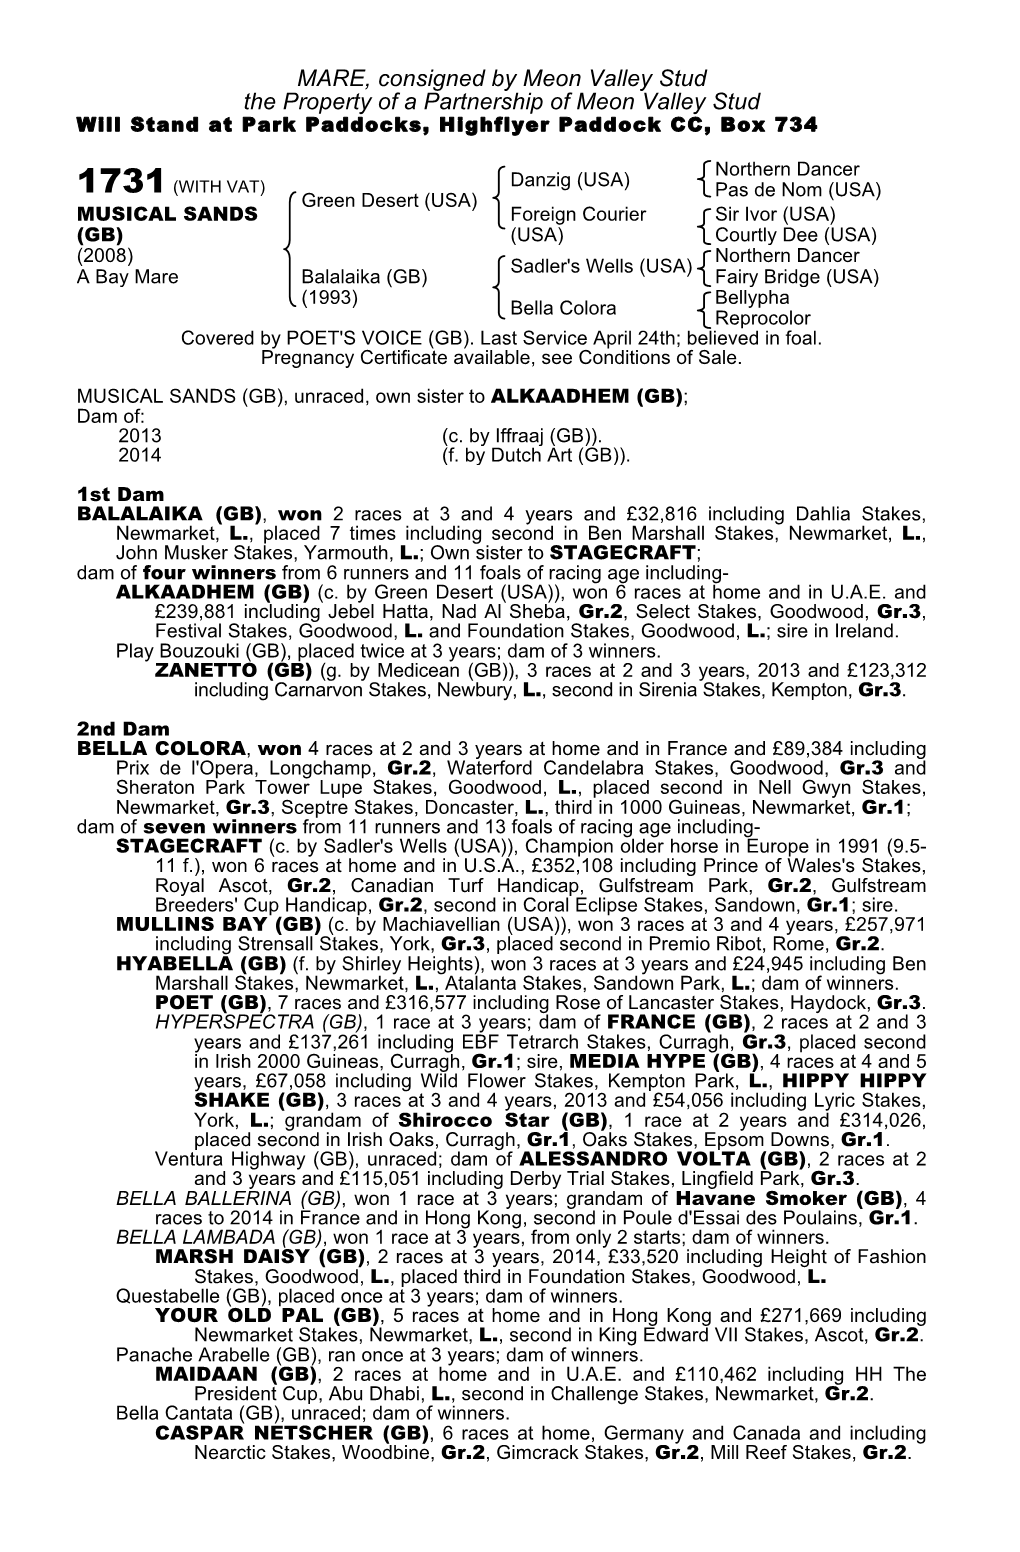 MARE, Consigned by Meon Valley Stud the Property of a Partnership of Meon Valley Stud Will Stand at Park Paddocks, Highflyer Paddock CC, Box 734